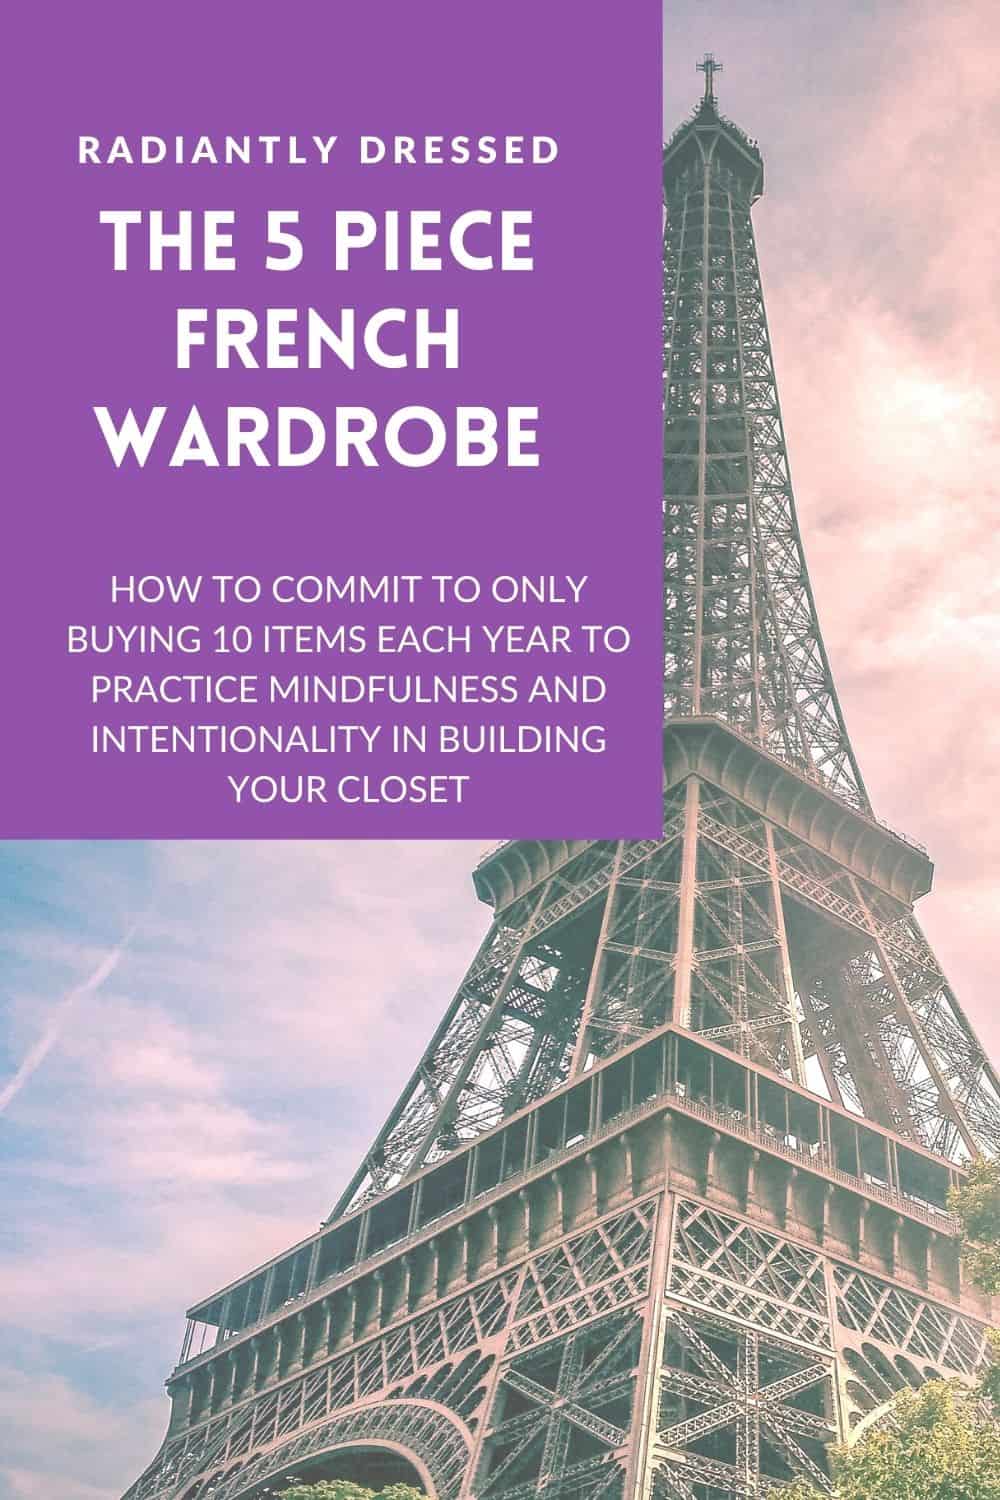 the 5 piece french wardrobe image of eiffel tower